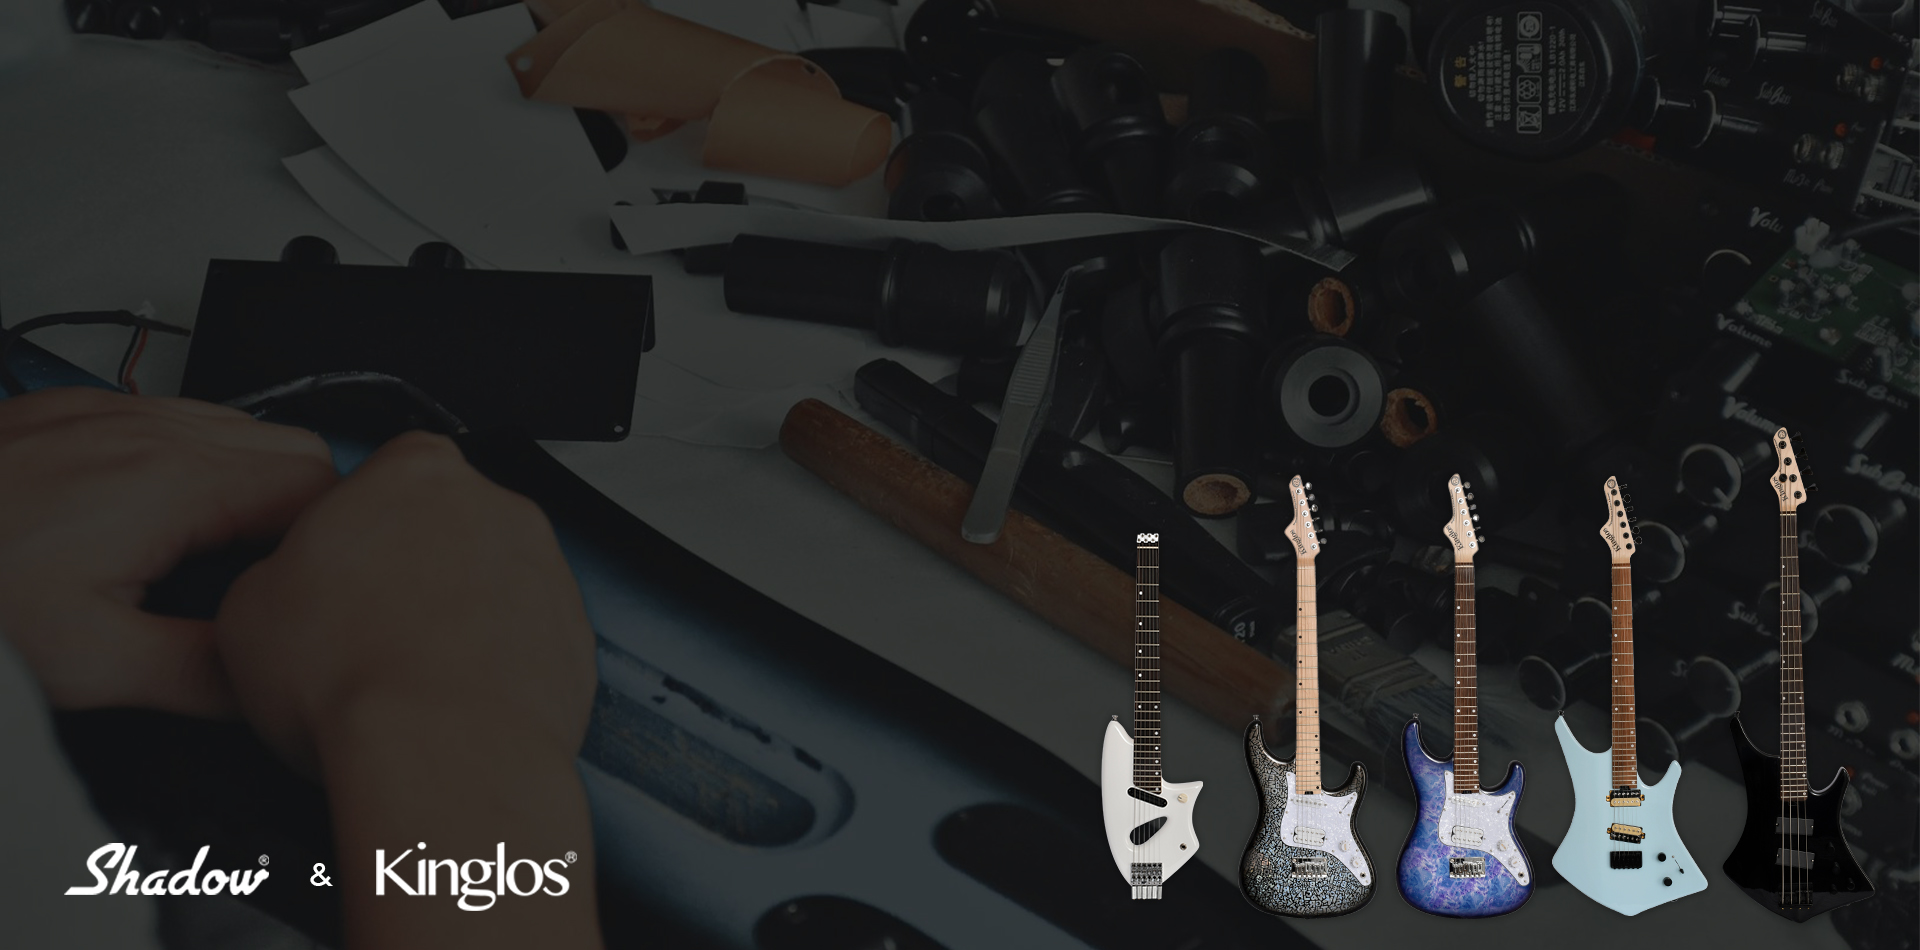 Shadow & Kinglos Co-branded Electric Musical Instruments